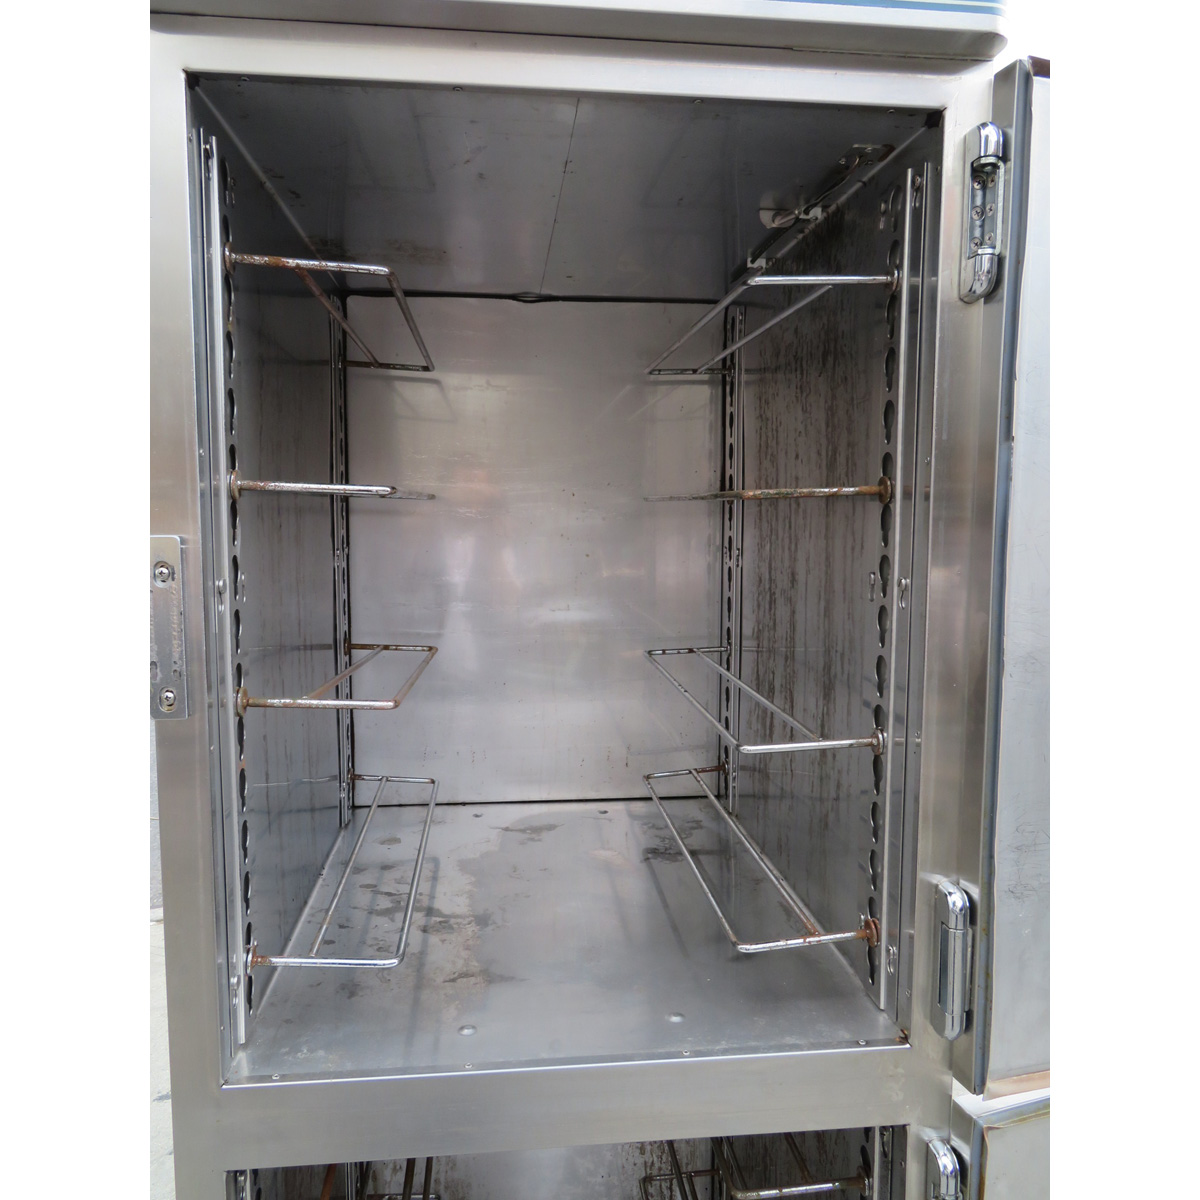 Alto Shaam 1200-UP Low Temperature Double Hot Food Holding Cabinet, Used Good Condition image 4